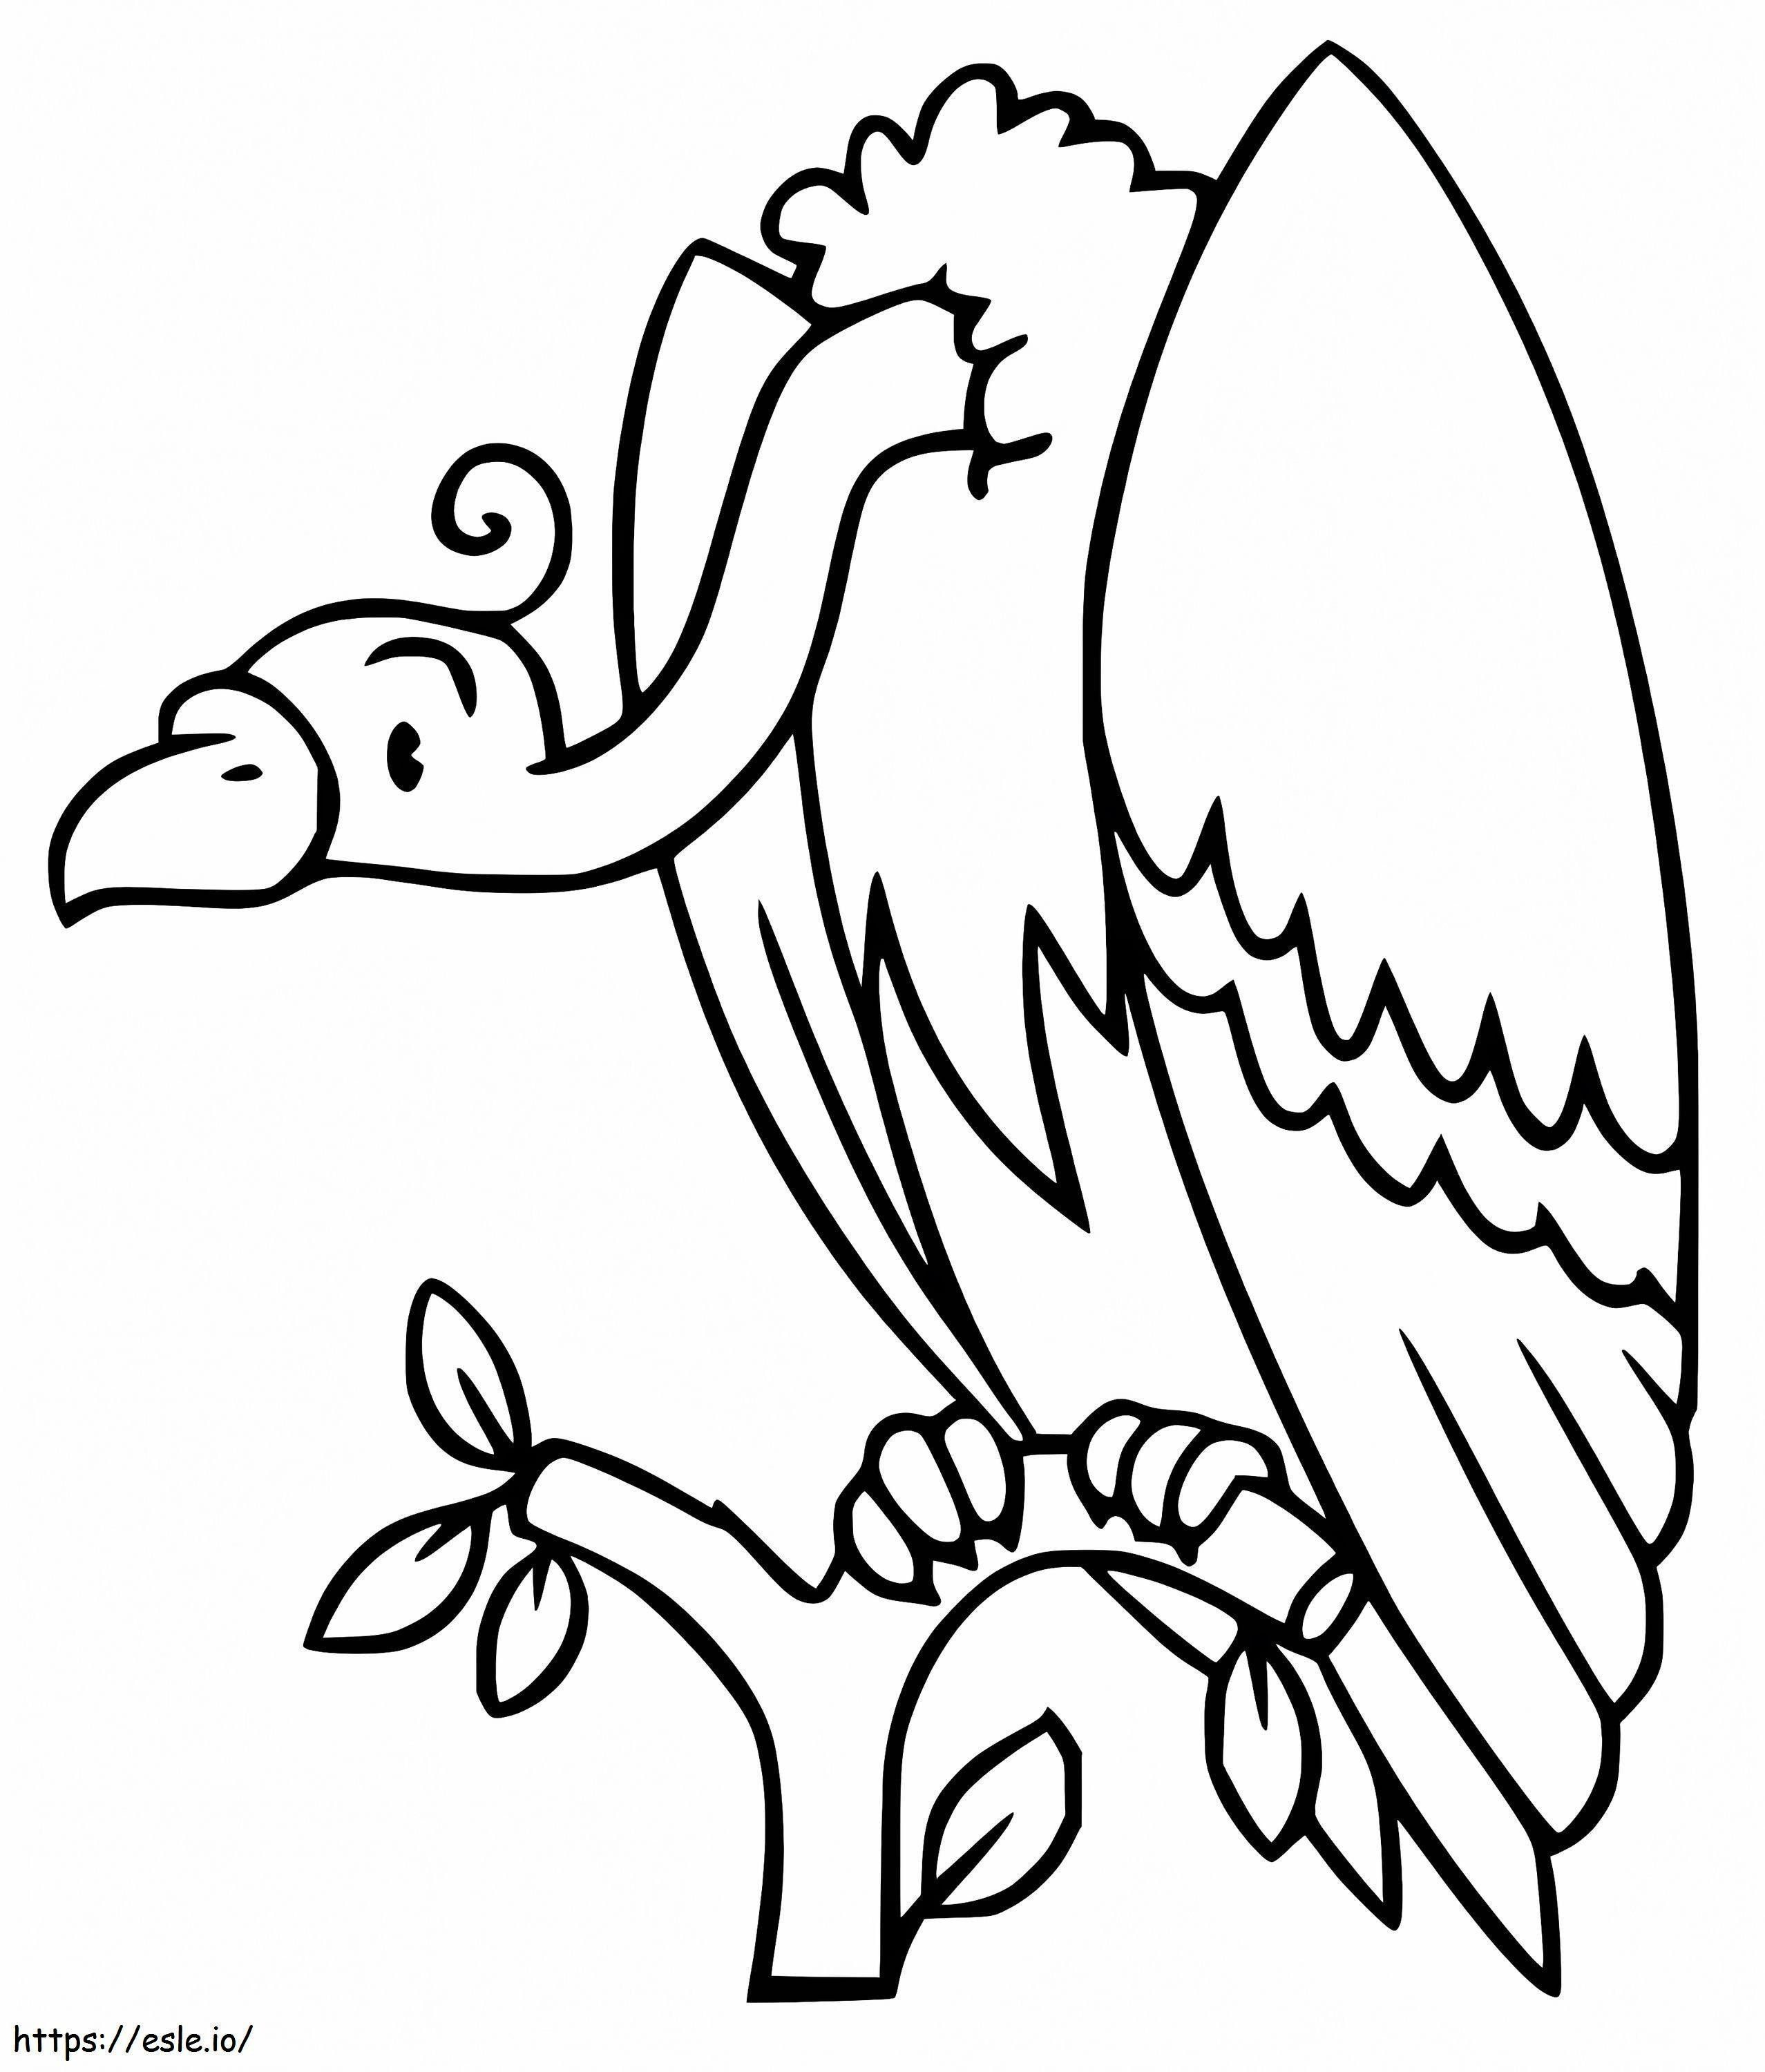 Vulture On A Branch coloring page